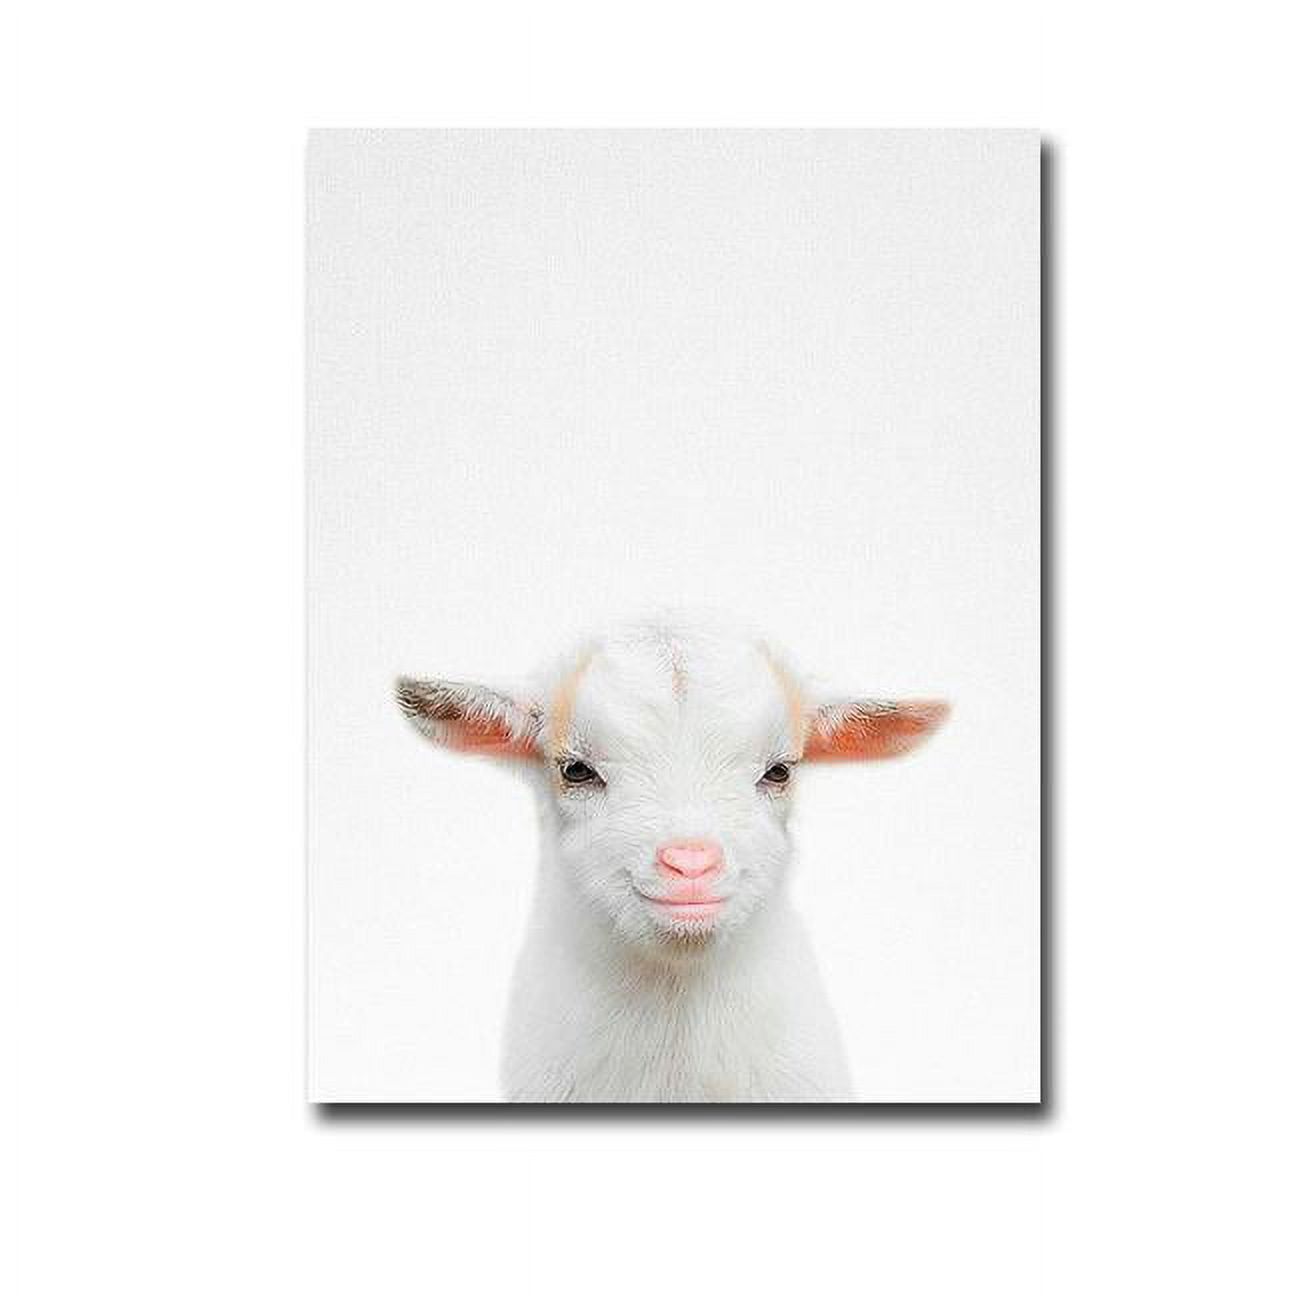 1216u495ig Baby Goat By Tai Prints Premium Gallery-wrapped Canvas Giclee Art - 12 X 16 X 1.5 In.